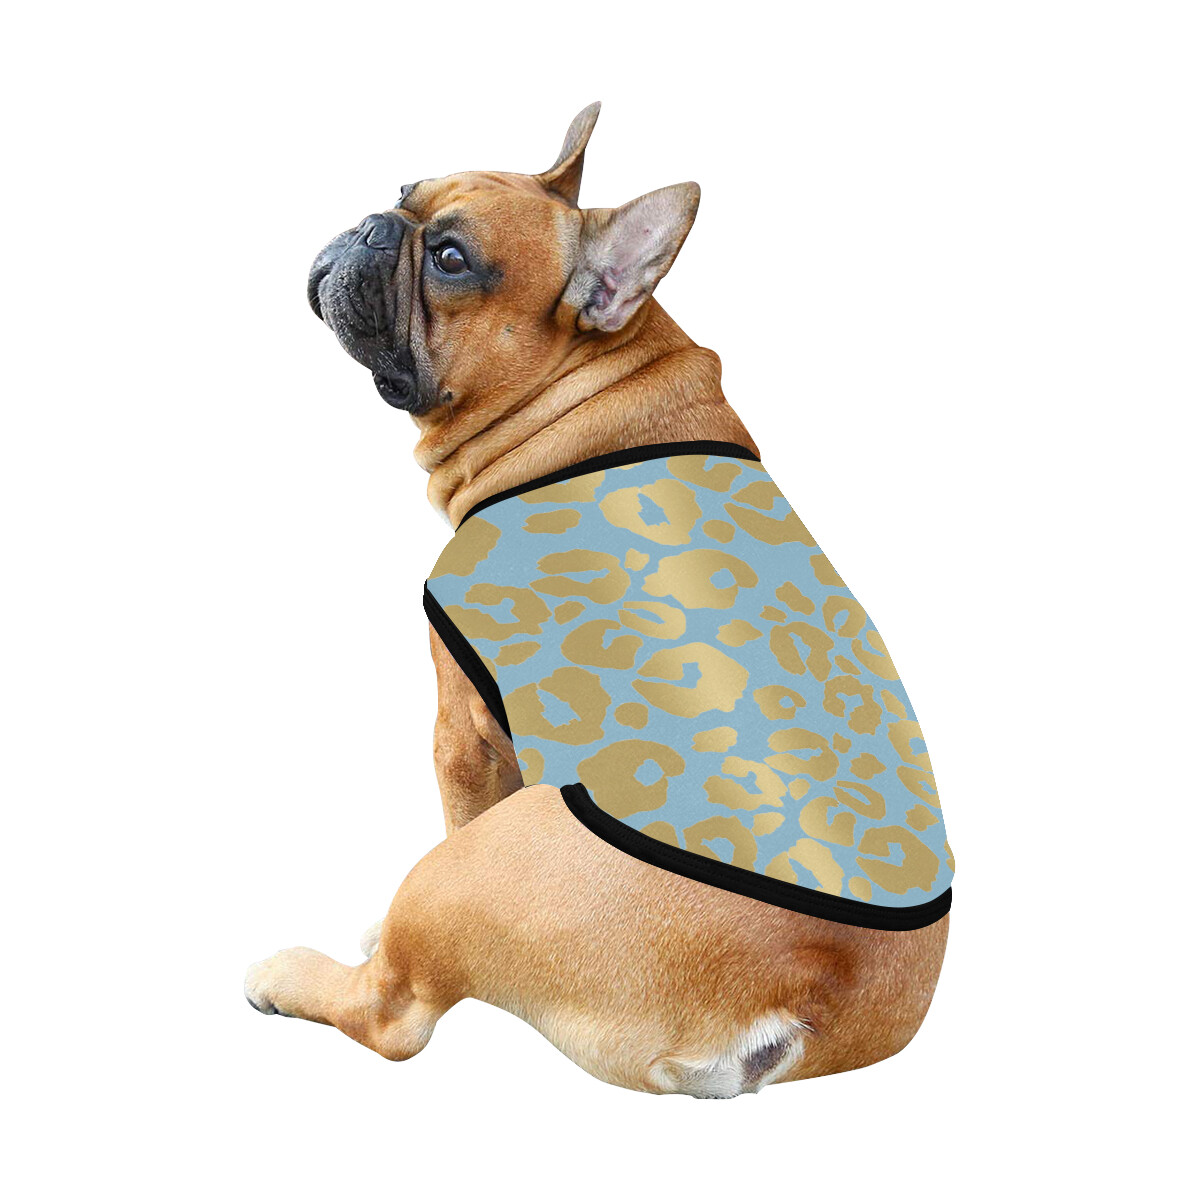 🐕 Leopard print Dog shirt, Dog Tank Top, Dog t-shirt, Dog clothes, Gifts, front back print, 7 sizes XS to 3XL, dog gifts, gold and regent st blue